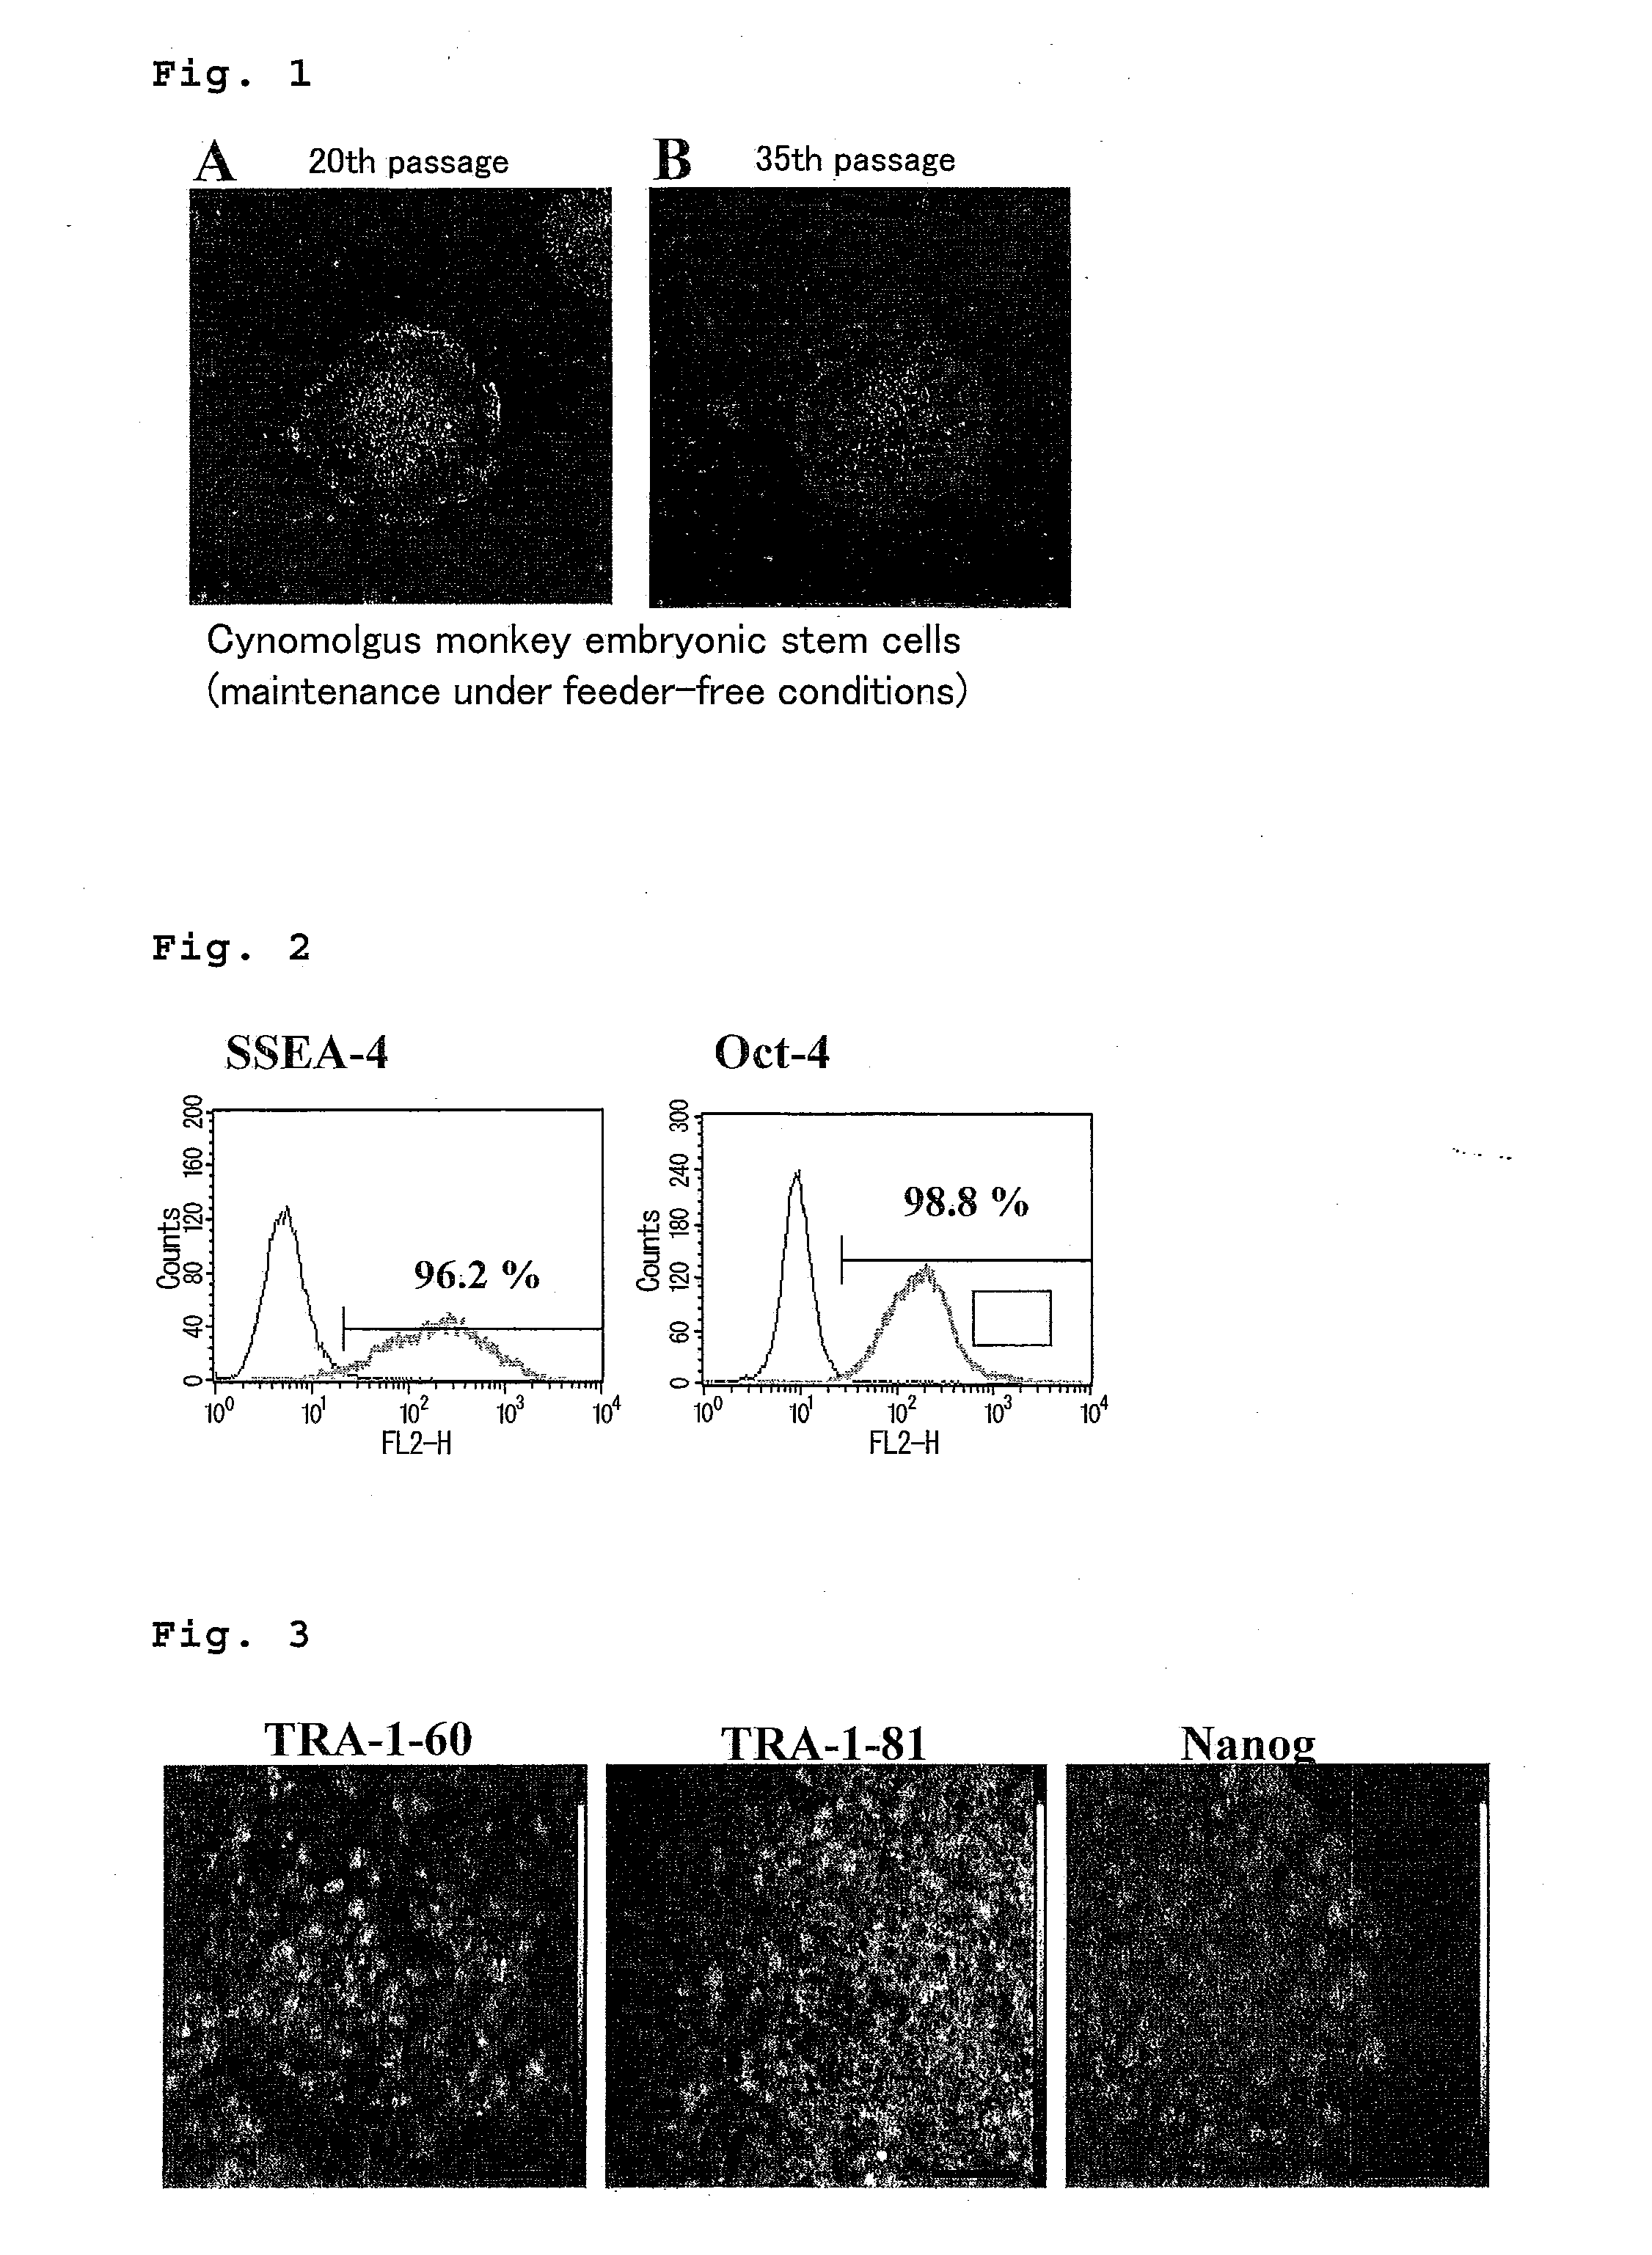 Method for culturing and subculturing primate embryonic stem cell, as well as method for inducing differentiation thereof